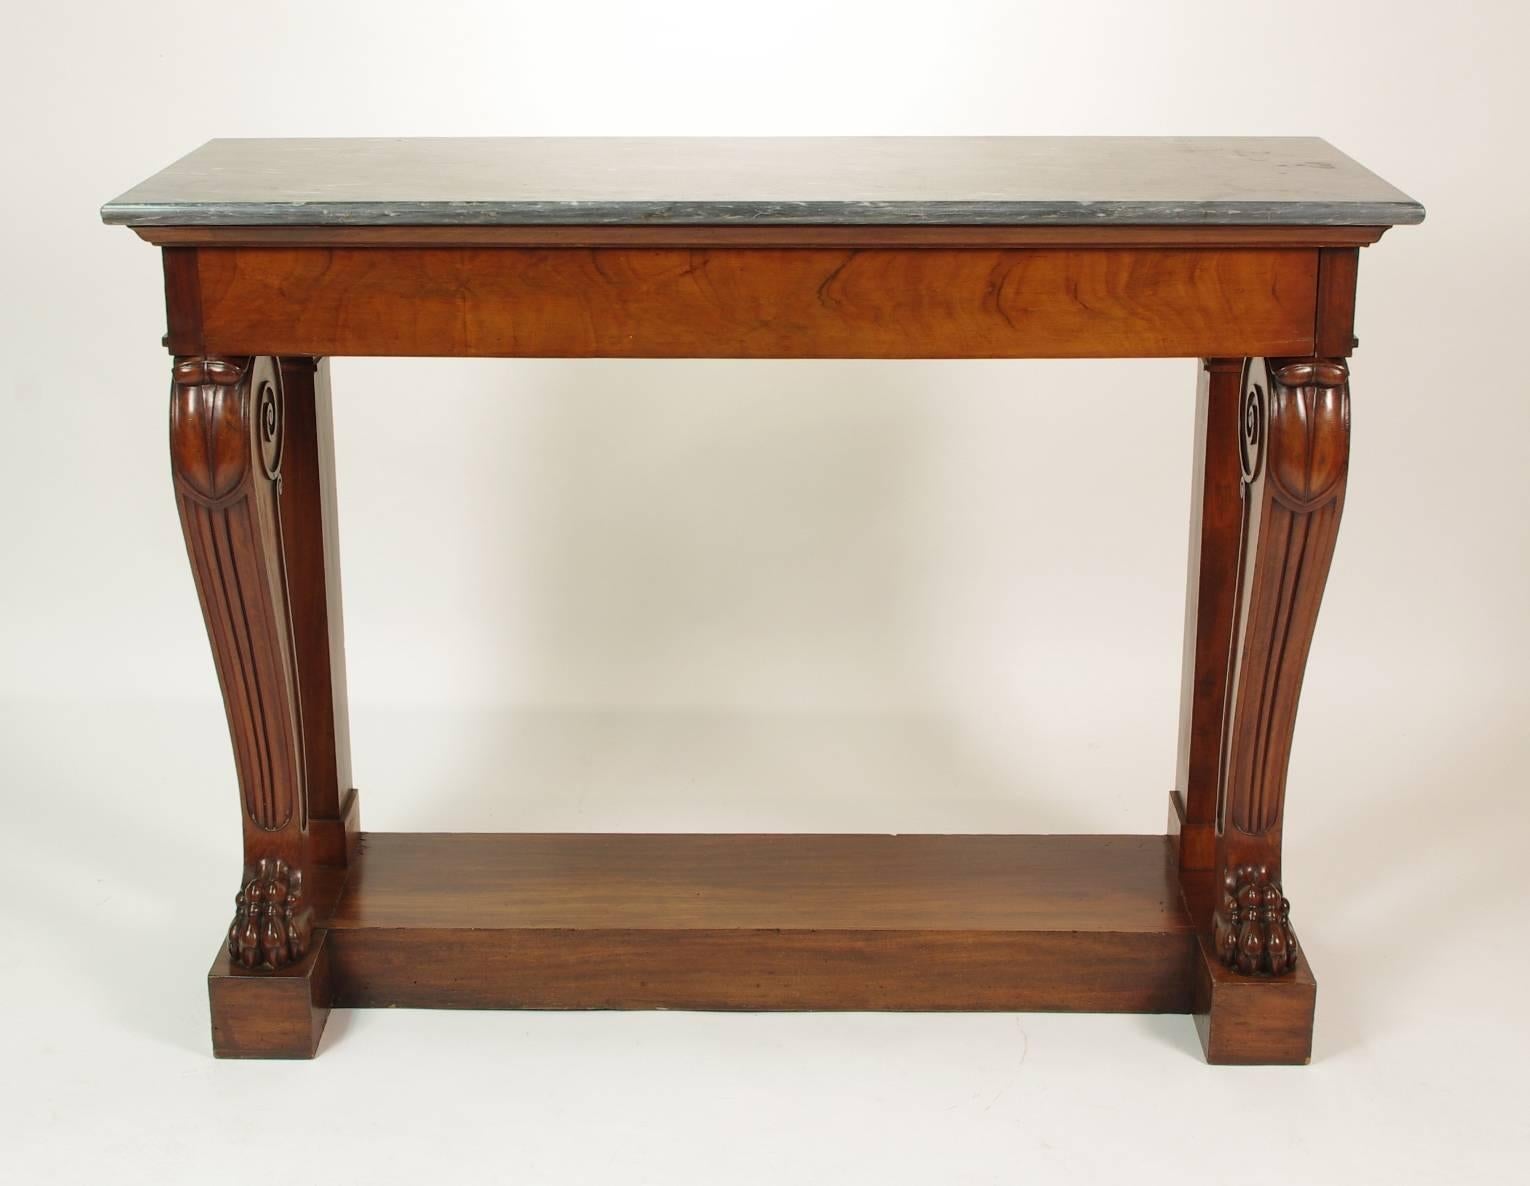 Fine Charles X (Restauration) mahogany console table, the original marble top (Blue Turquin) over the single long drawer; the two reeded uprights with volutes and leaf carved knees ending in paw feet, all on a plinth base. 
Signed, L. BELLANGÉ.